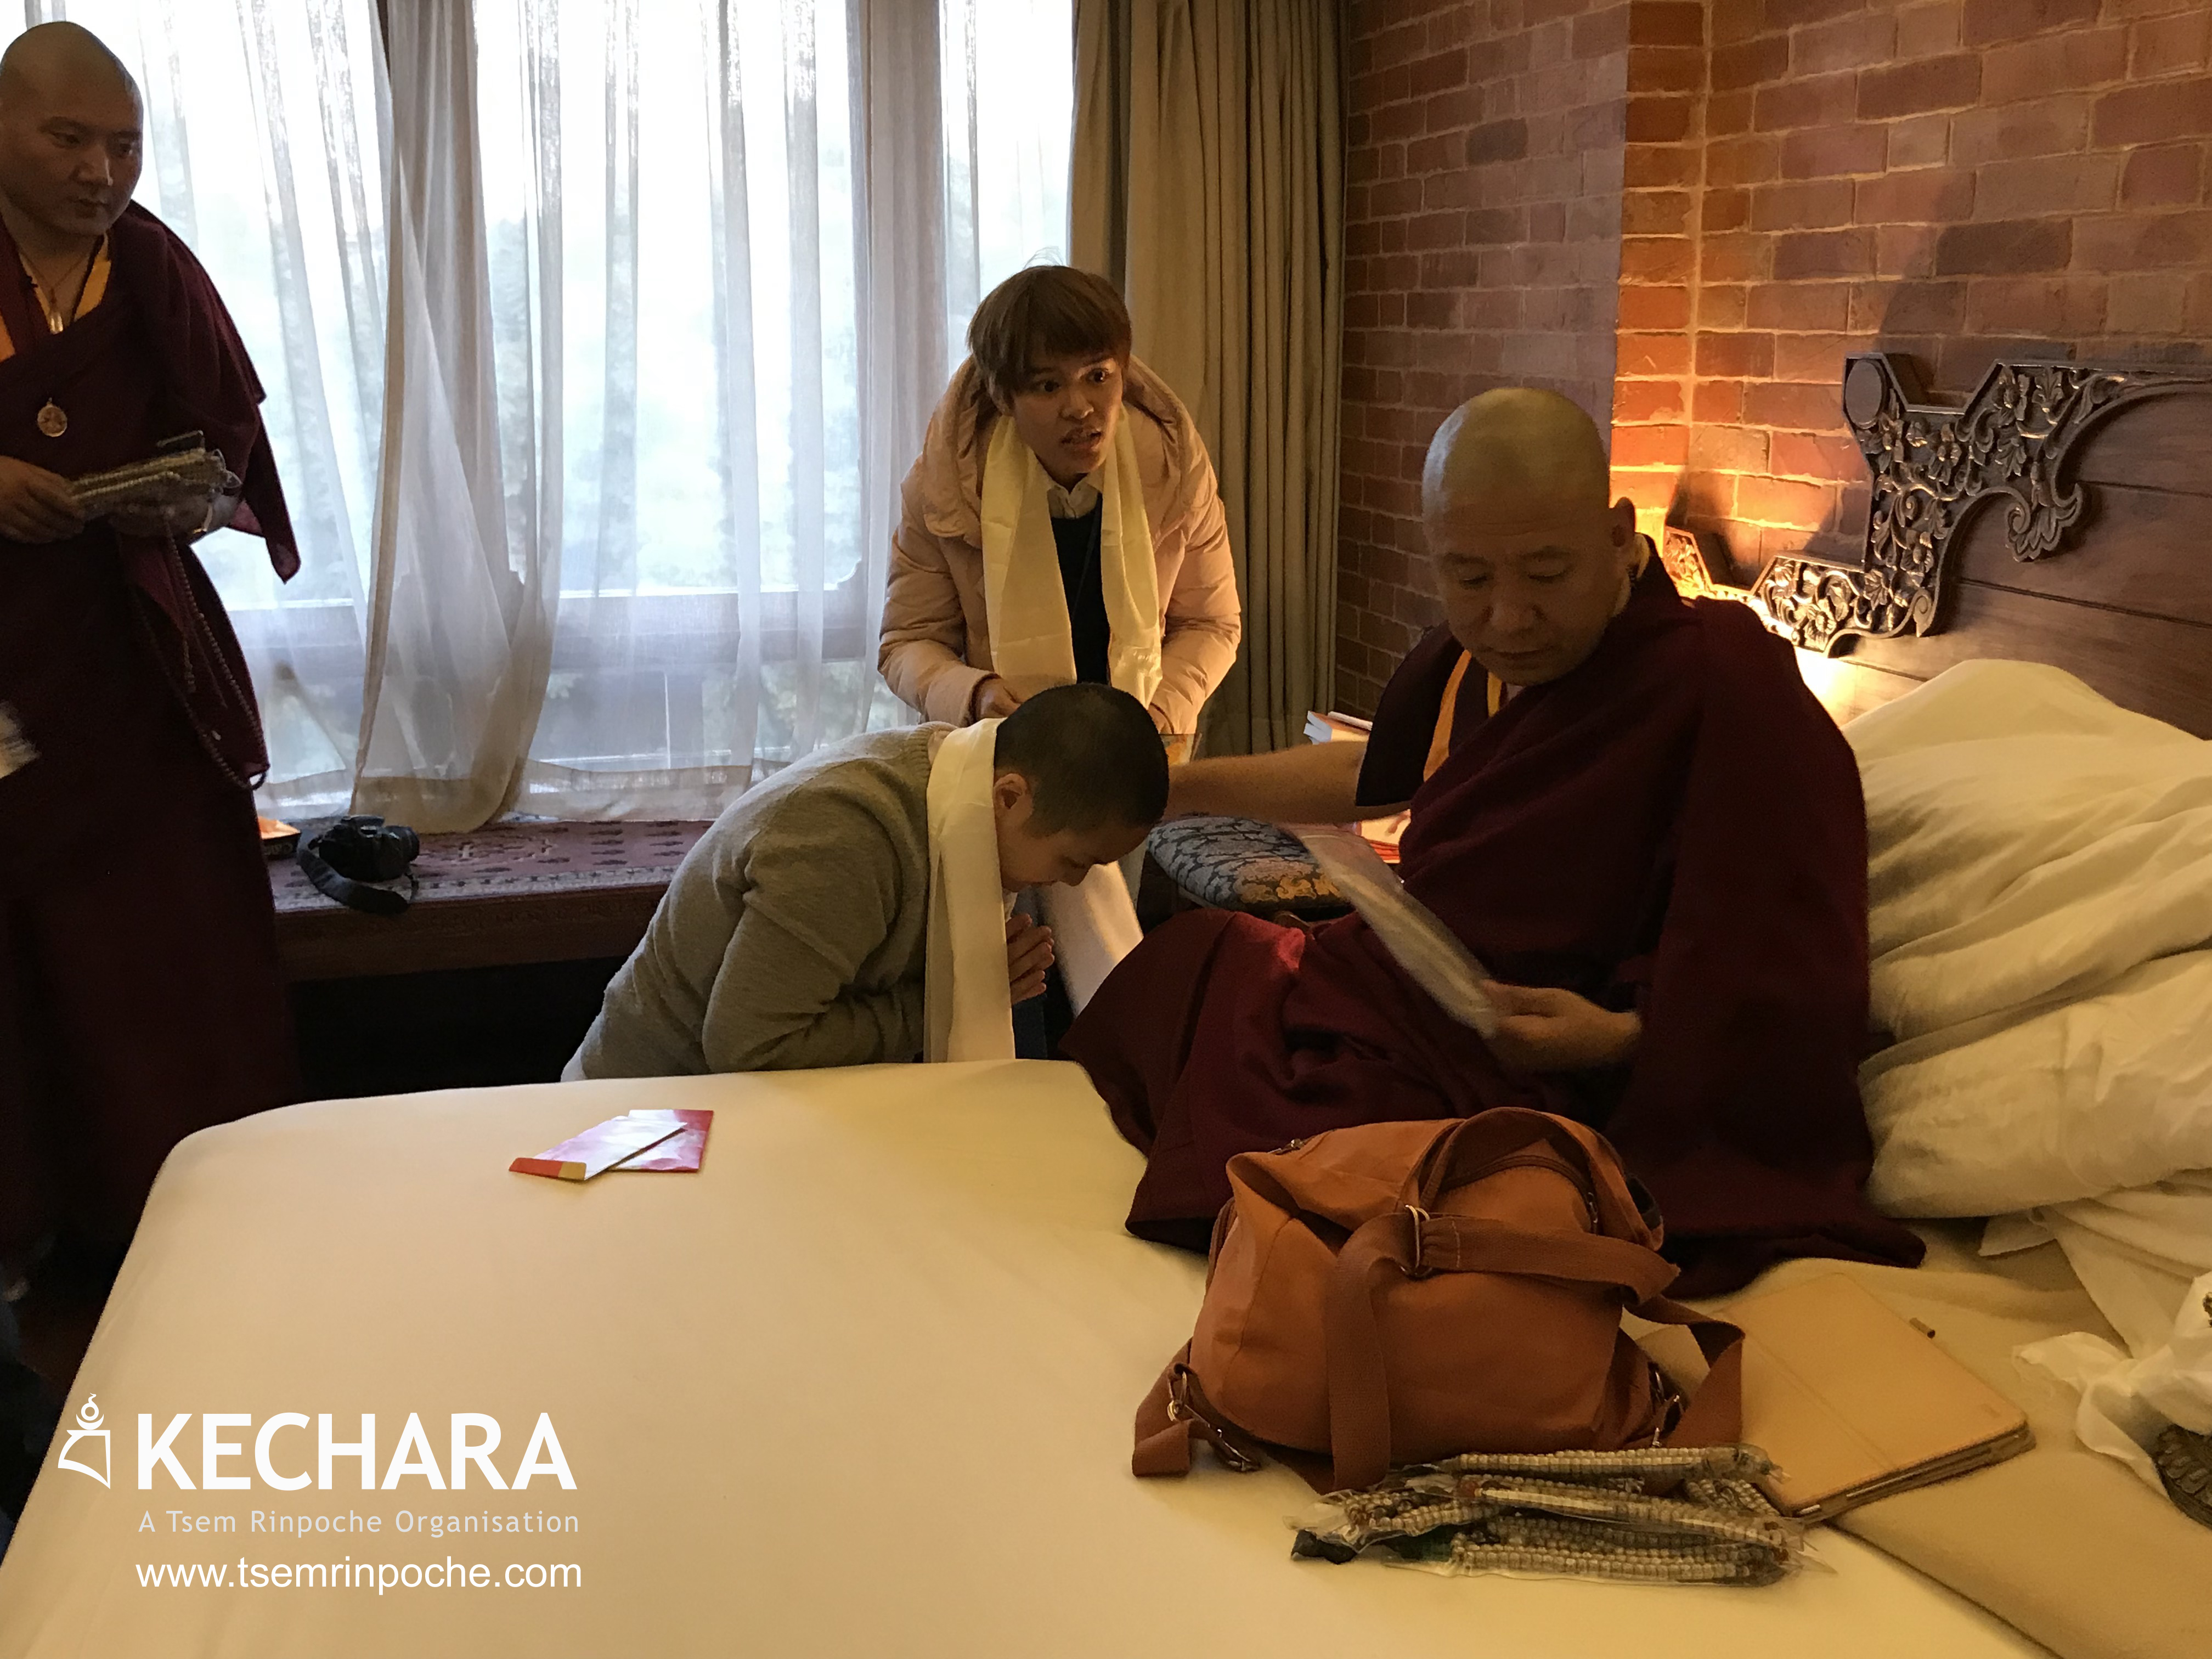 We were fortunate to have audience with Lama Thubten Phurbu, a prominent Dorje Shugden practitioner who gives life entrustment (sogtae) of Dorje Shugden to tens of thousands of people in Tibet